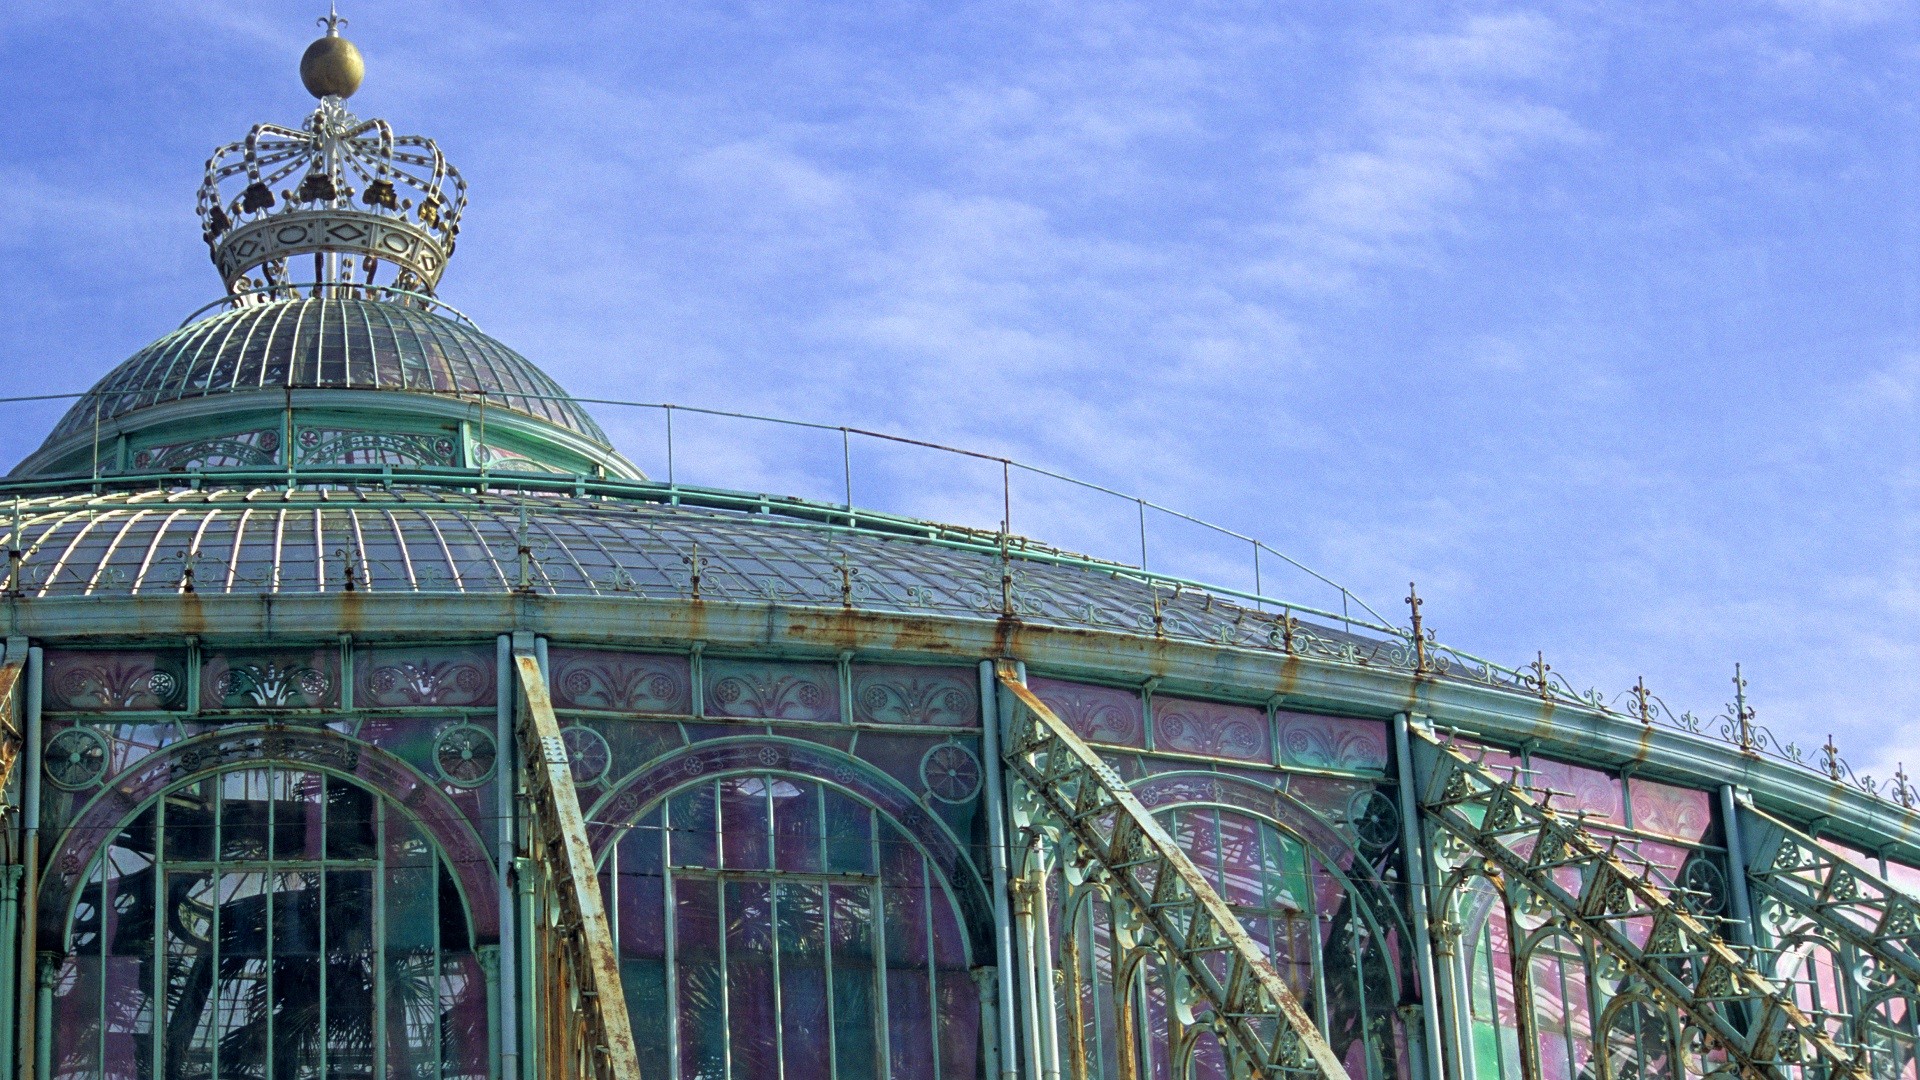 greenhouse roof at Laeken in Brussels